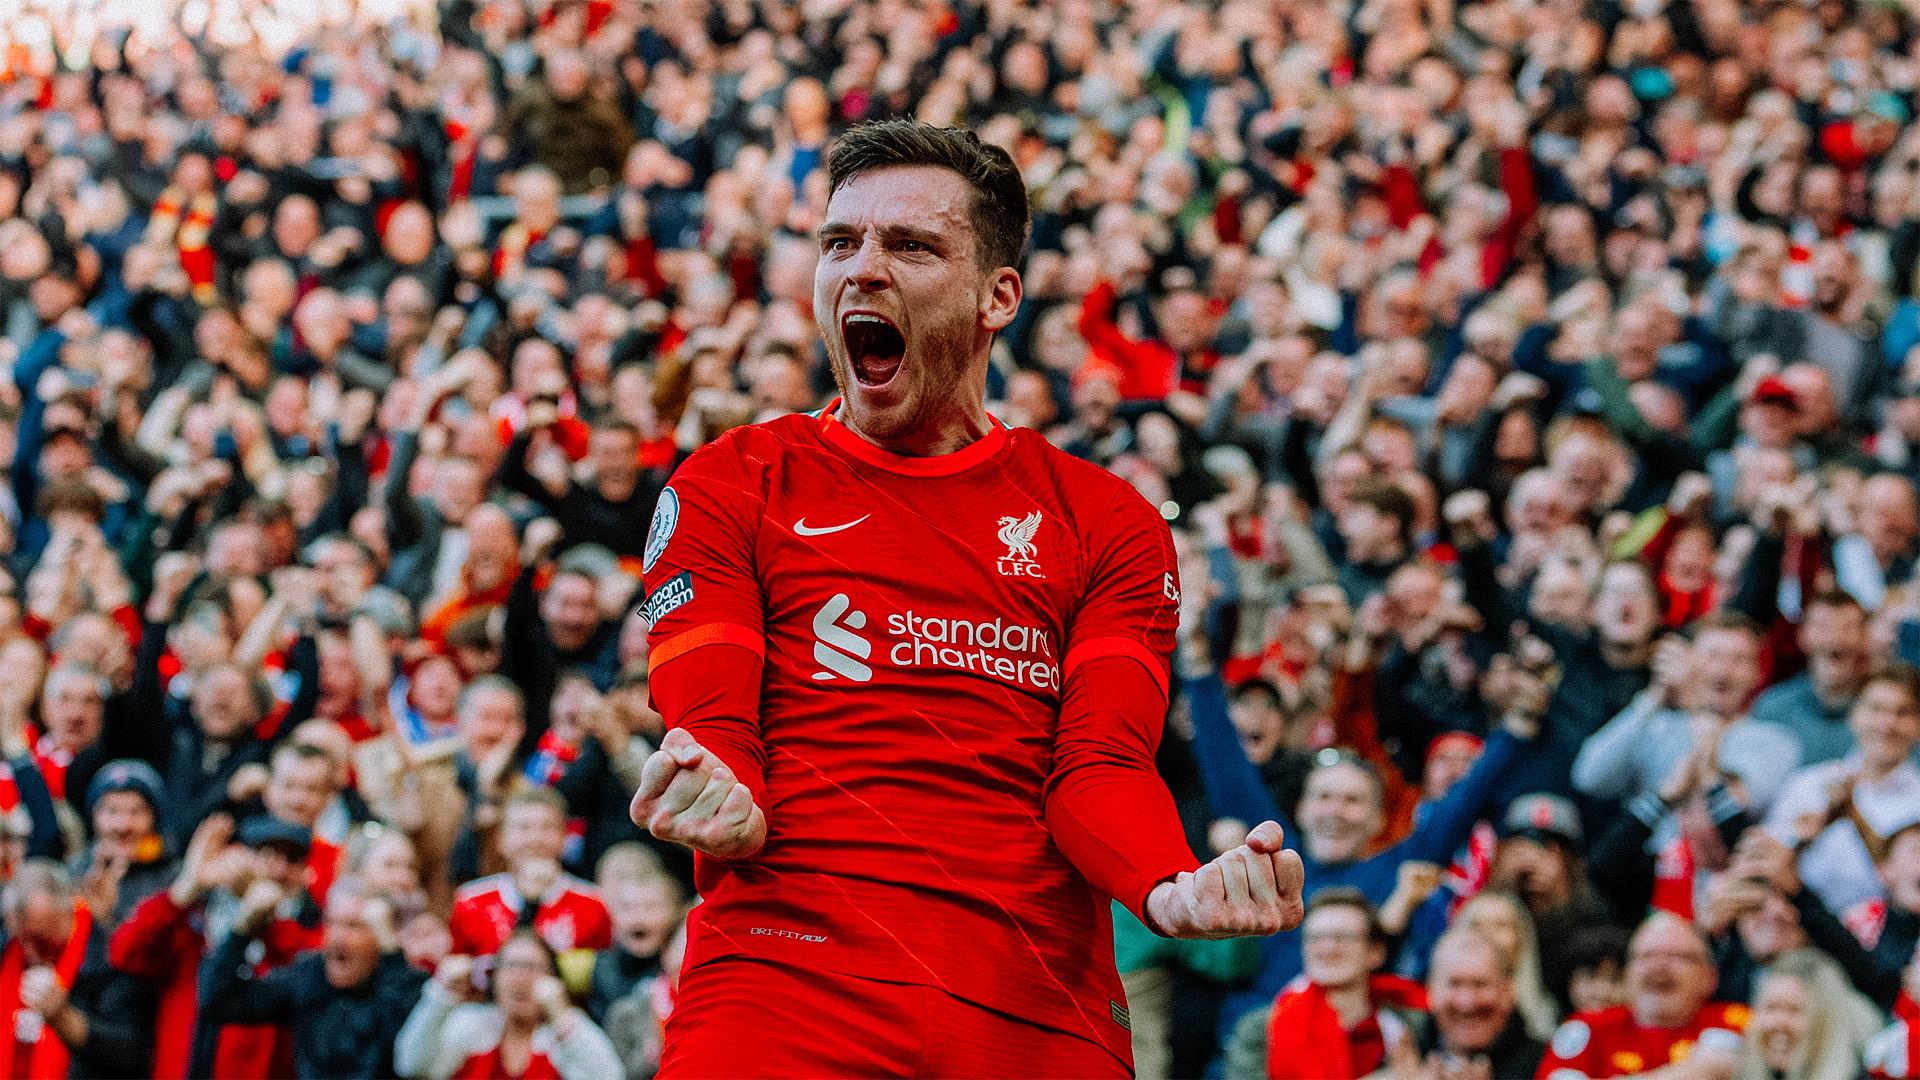 Liverpool's Robertson celebrates after scoring a goal